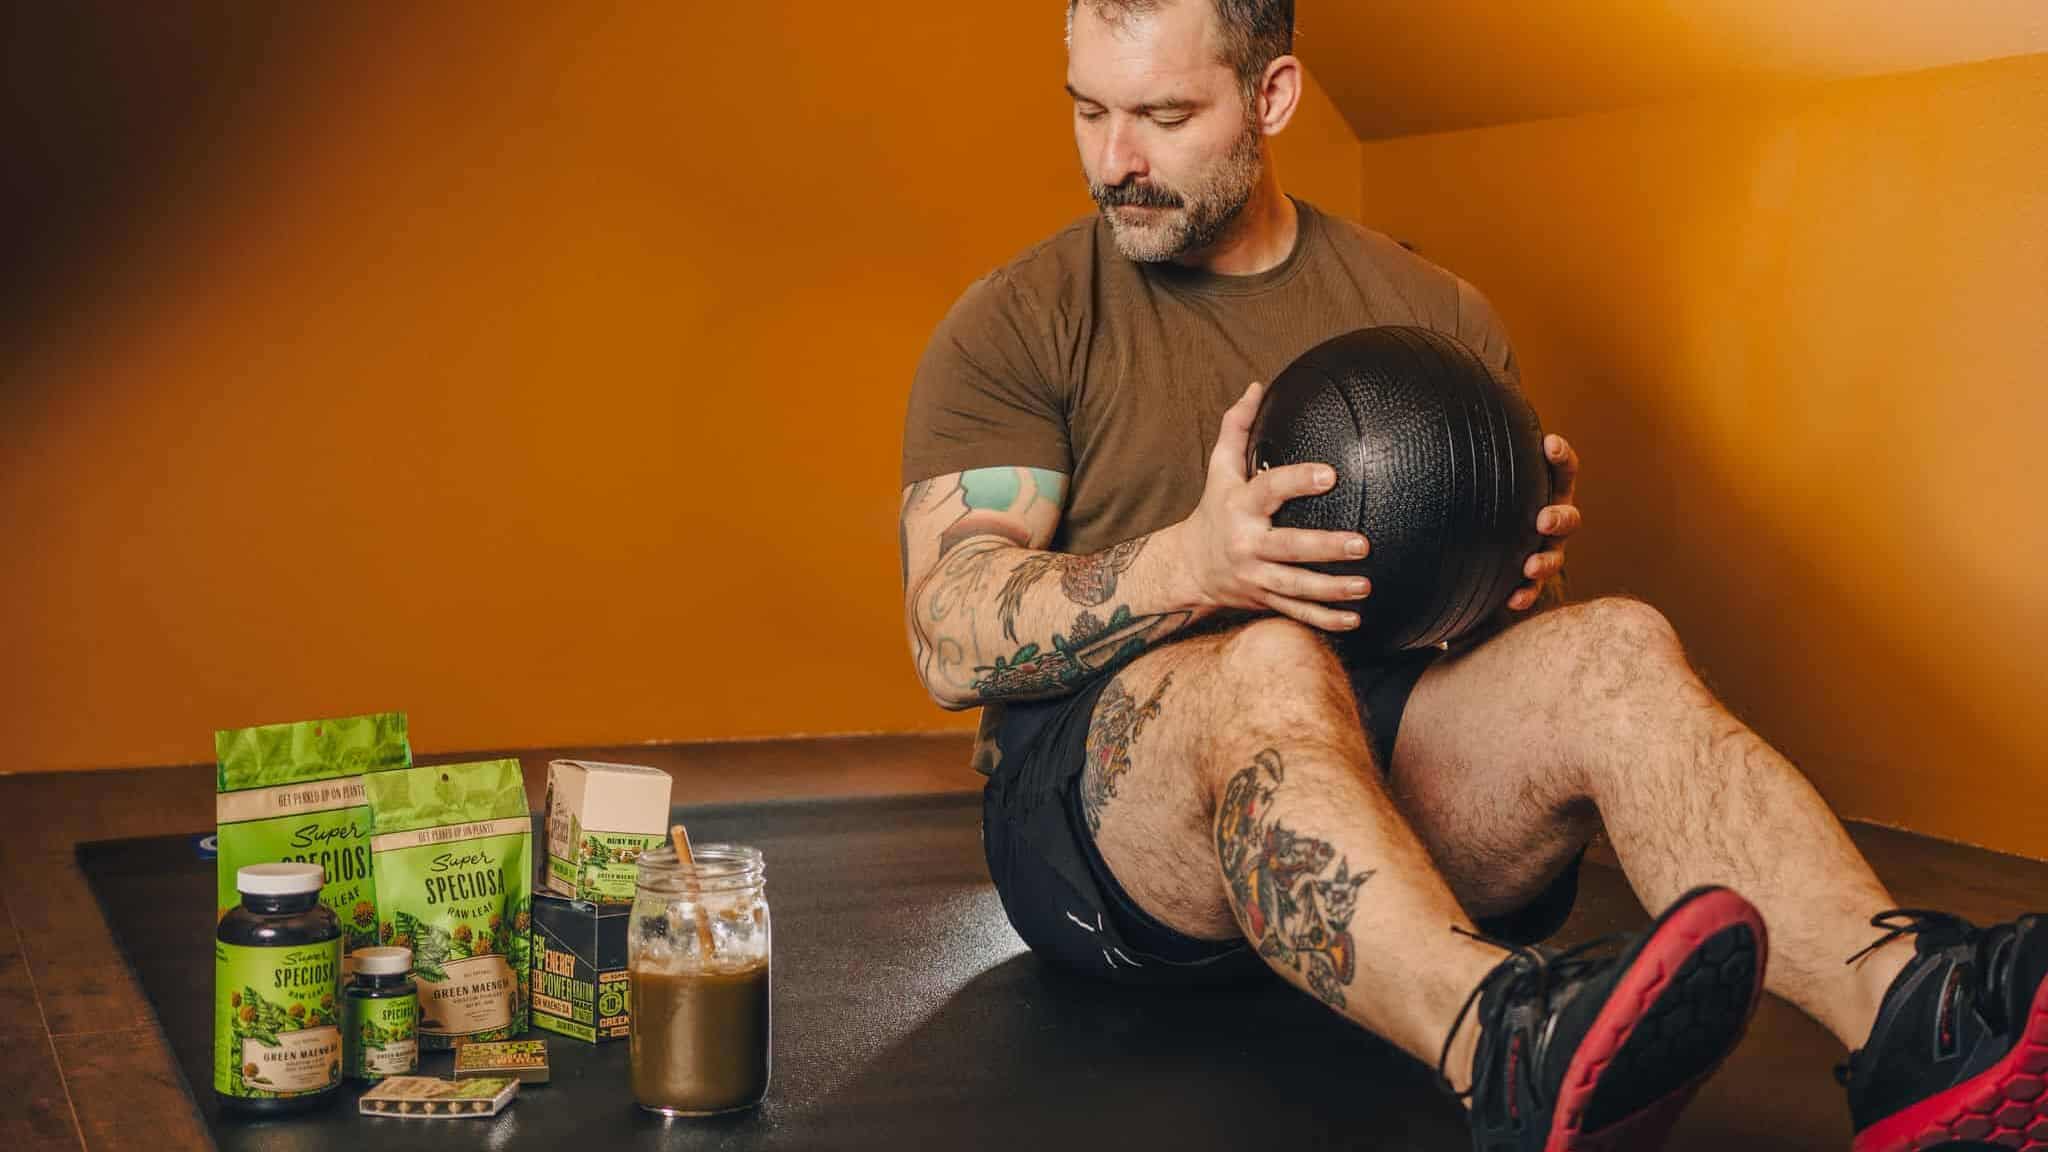 Man exercising with Super Speciosa's kratom products. People use kratom for energy benefits.